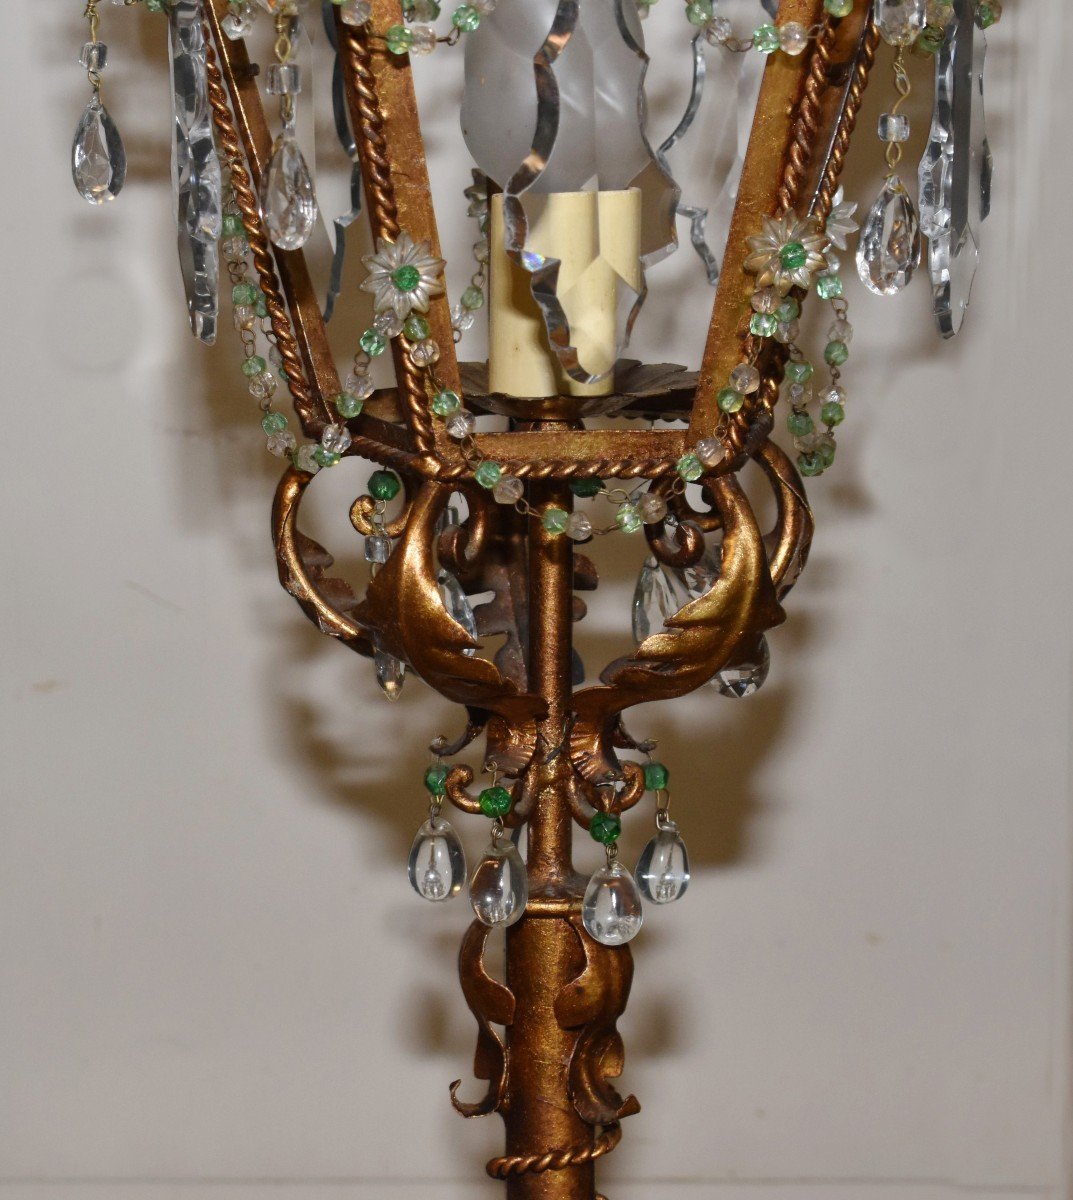 Florentine Floor Lamp In Wrought Iron And Sheet Metal, Painted Old Gold, Lantern Decor With Pampilles-photo-3